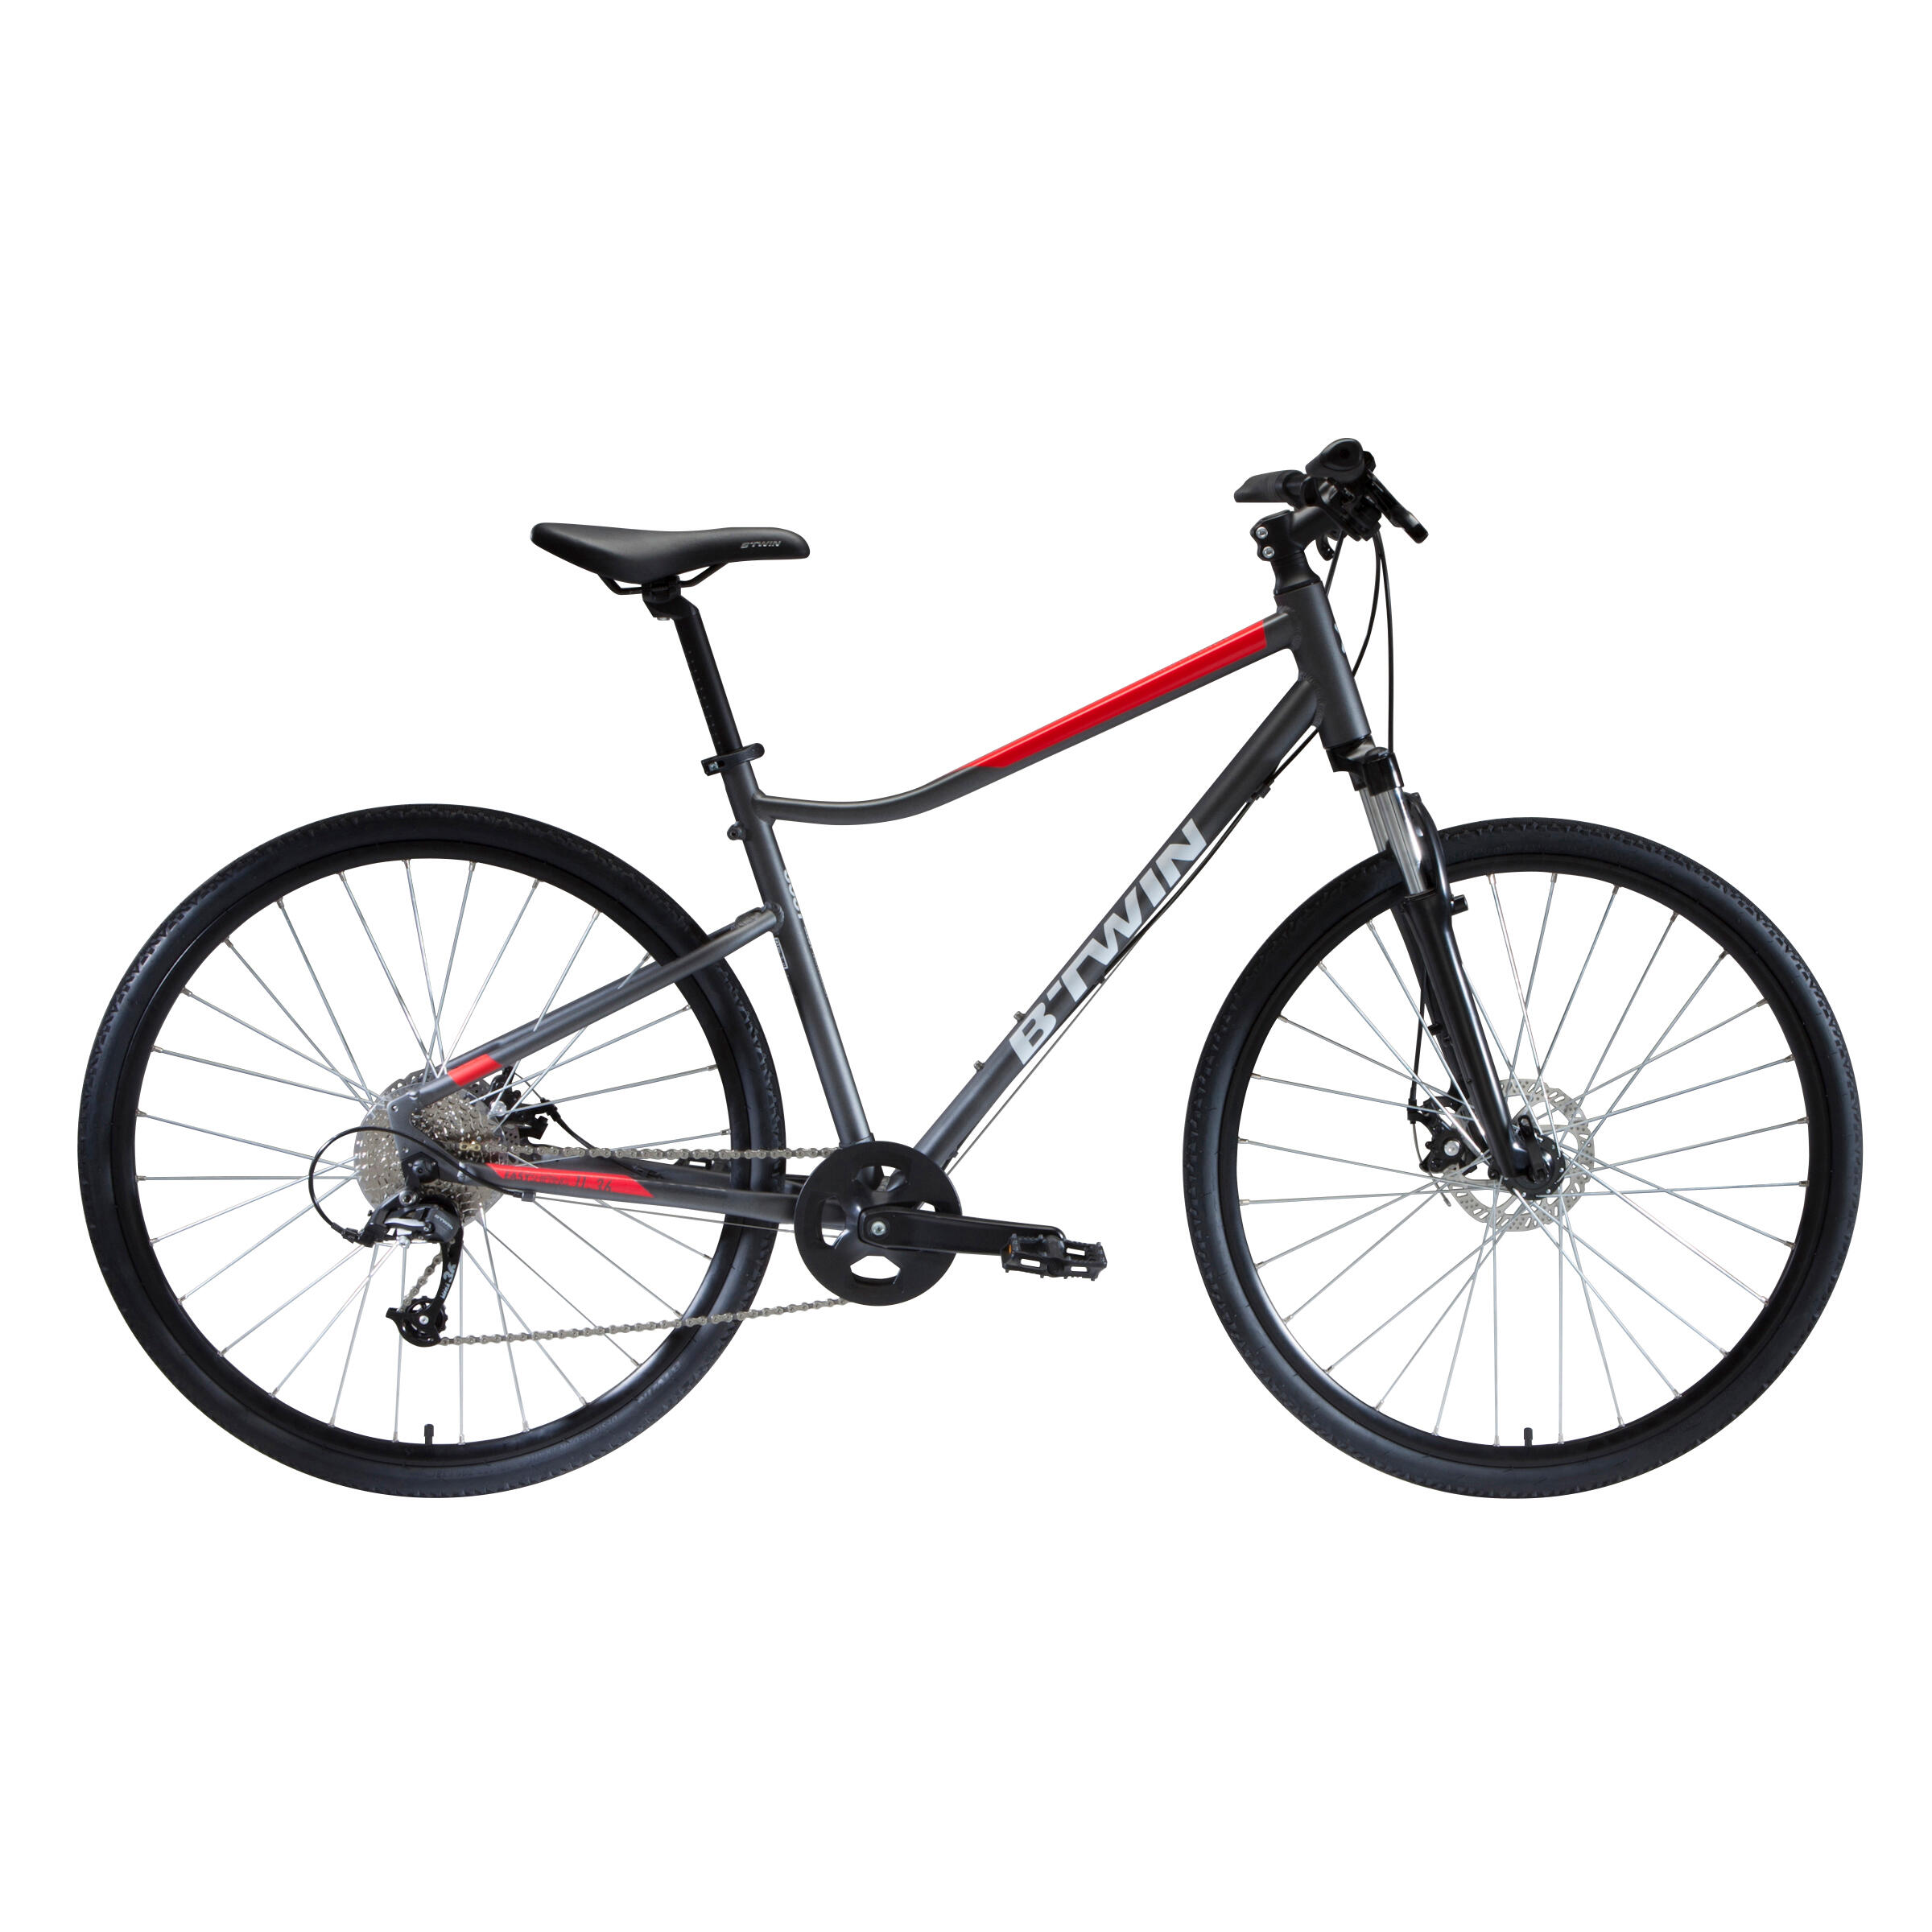 Hybrid Bike with Disc Brakes - RS 500 Grey/Red - RIVERSIDE